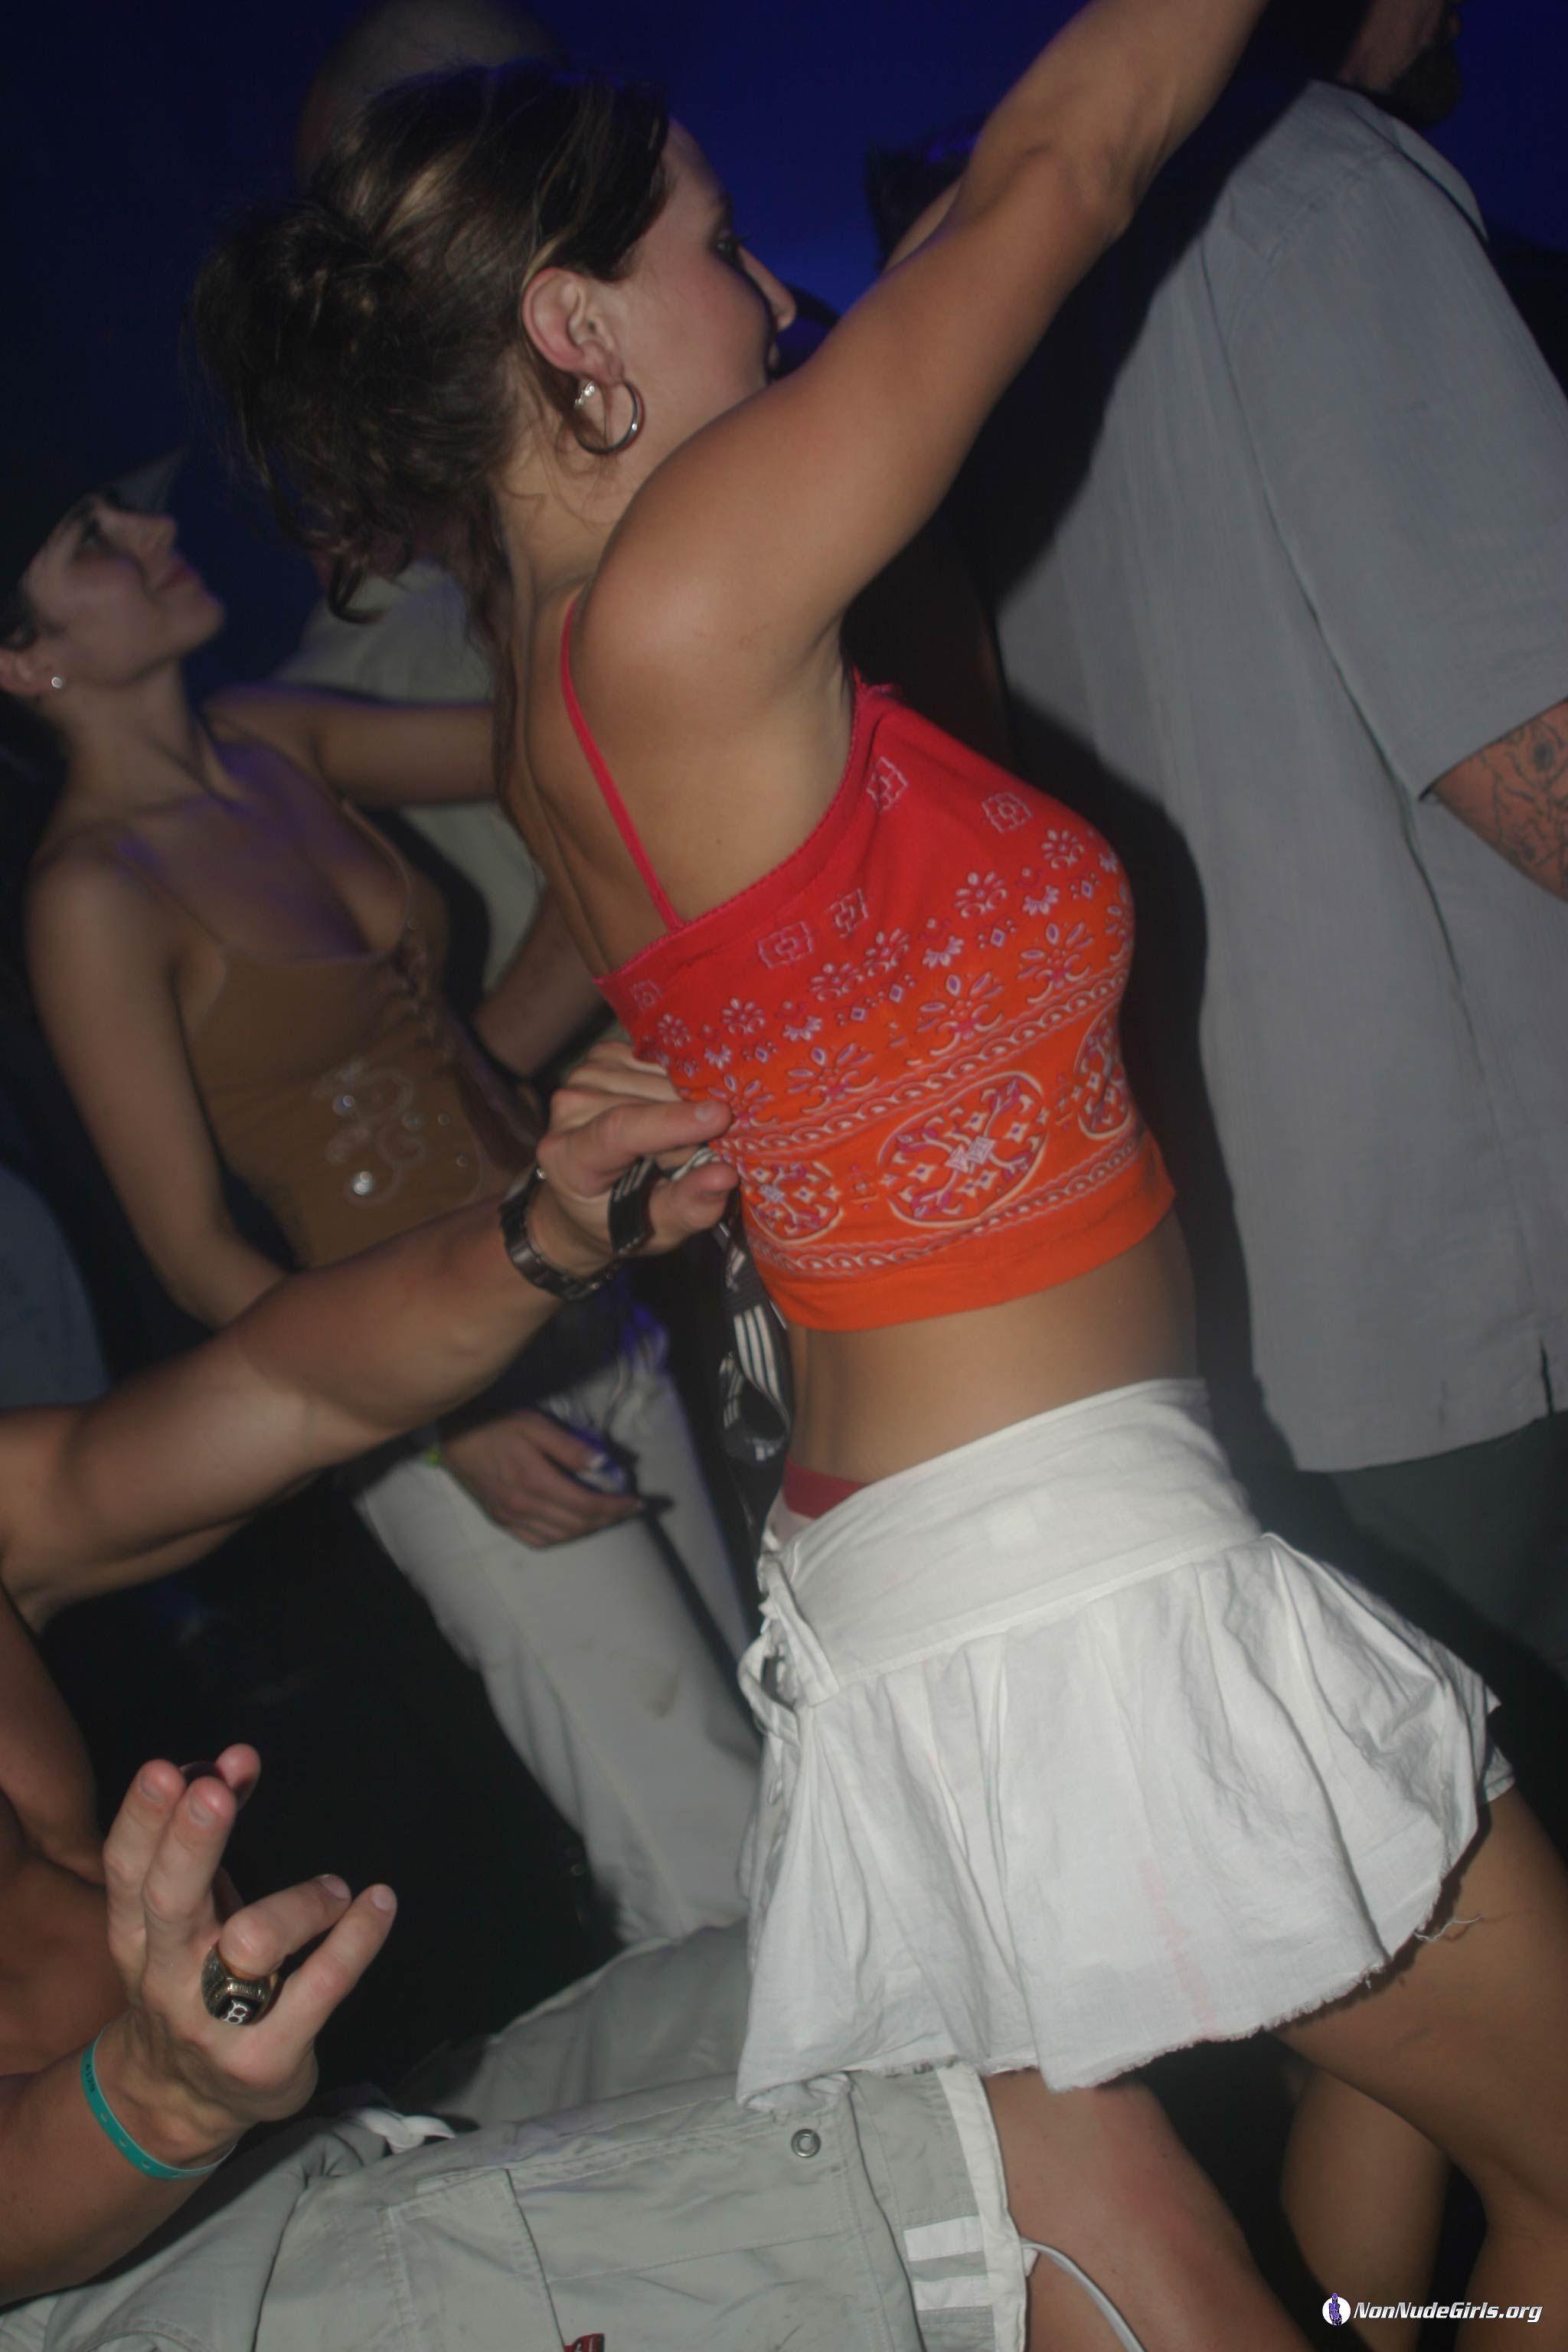 Pictures of hot teen girls partying #60680442